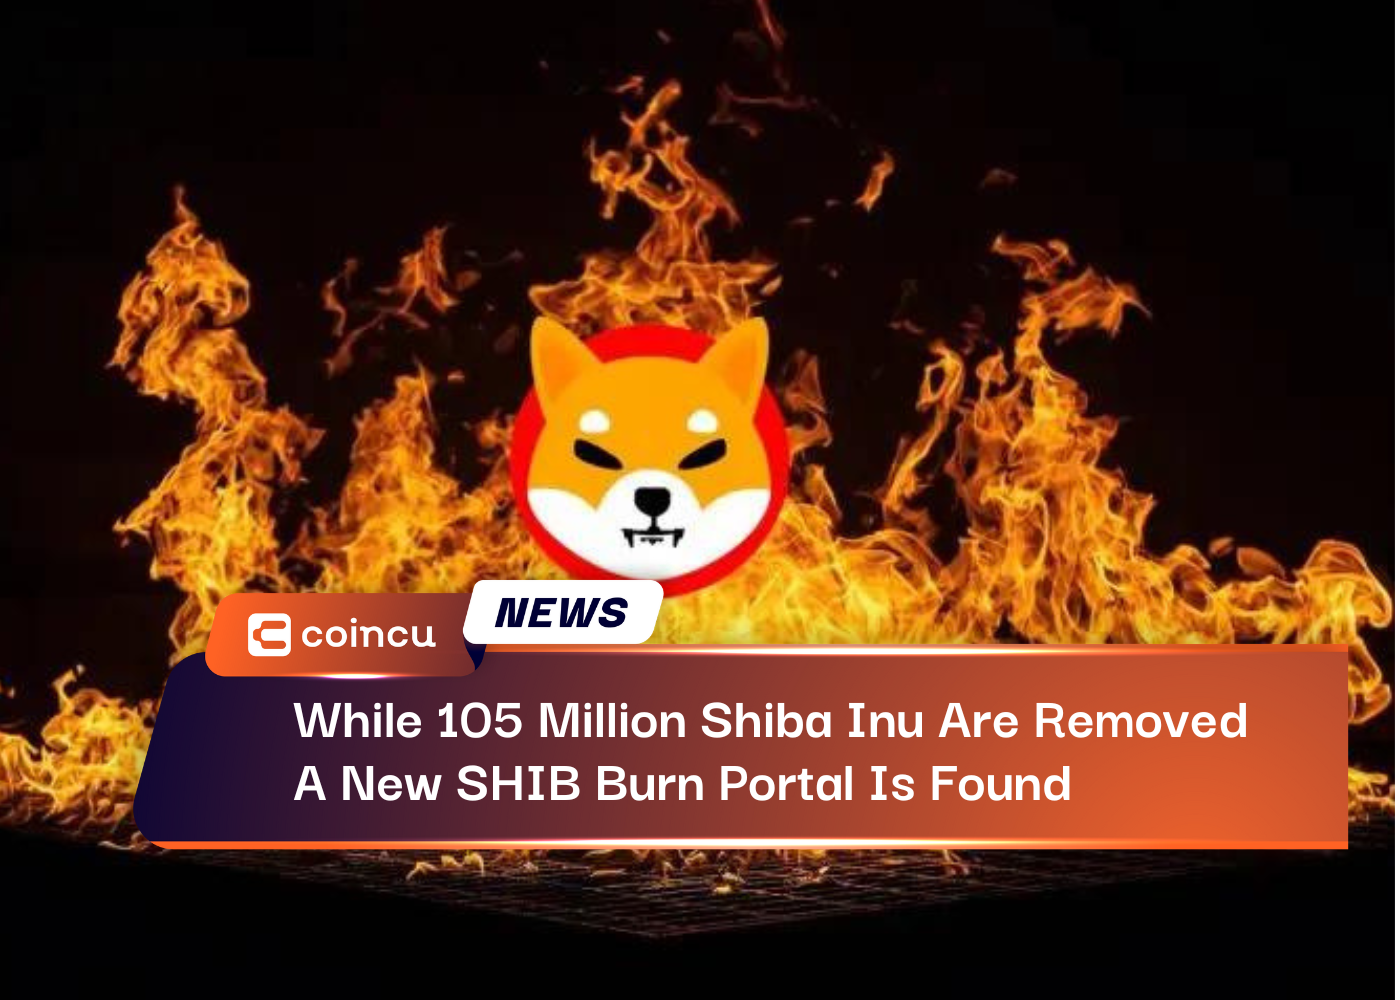 While 105 Million Shiba Inu Are Removed